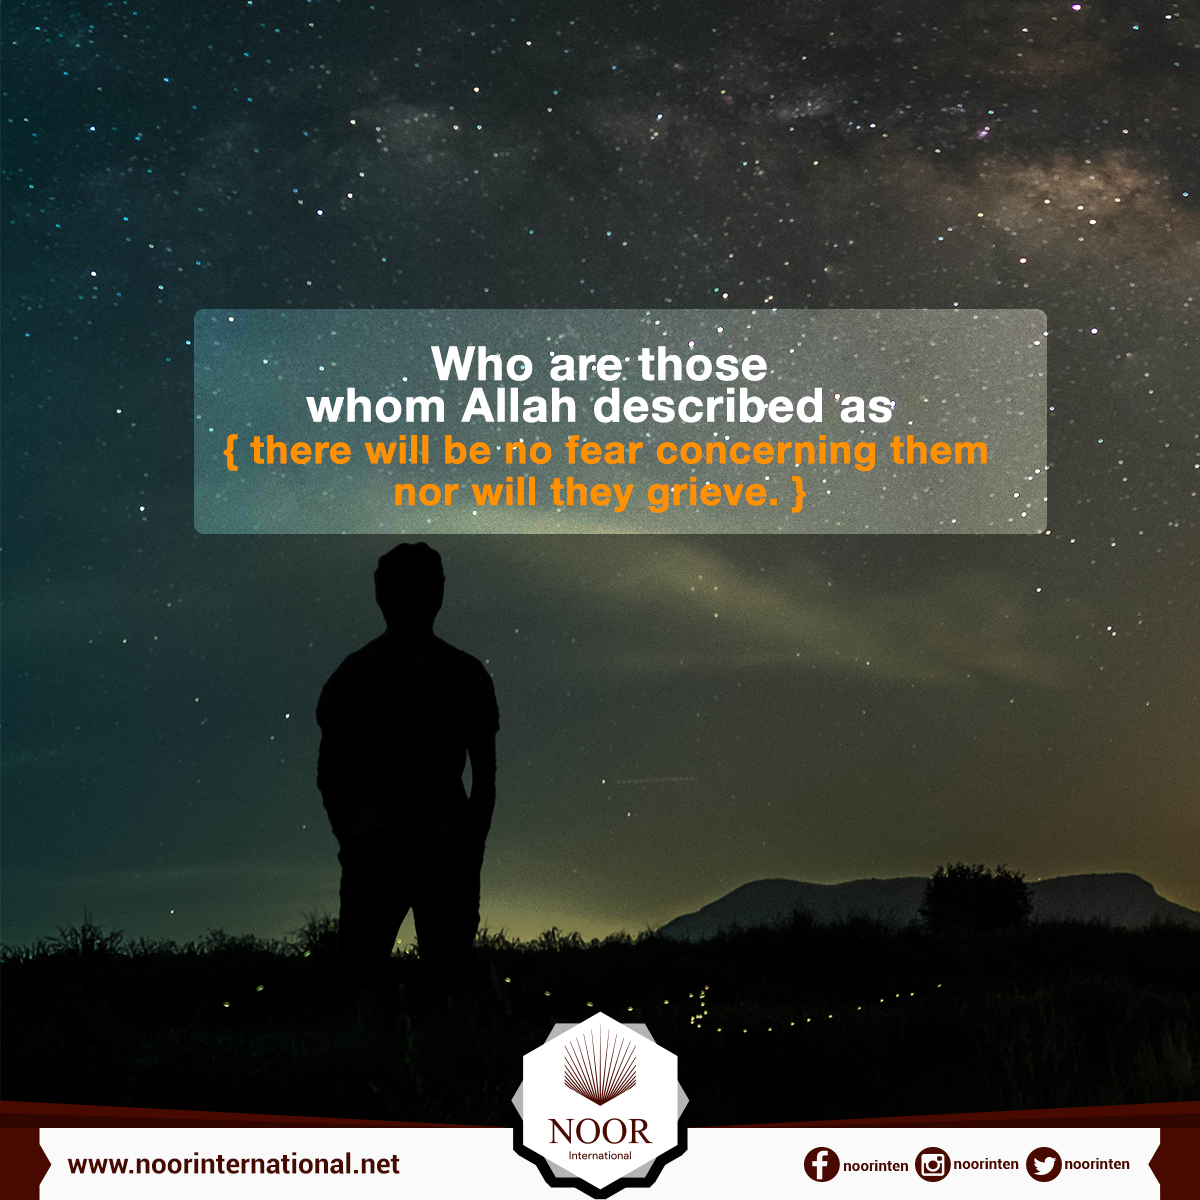 Who are those whom Allah described as { there will be no fear concerning them, nor will they grieve. }